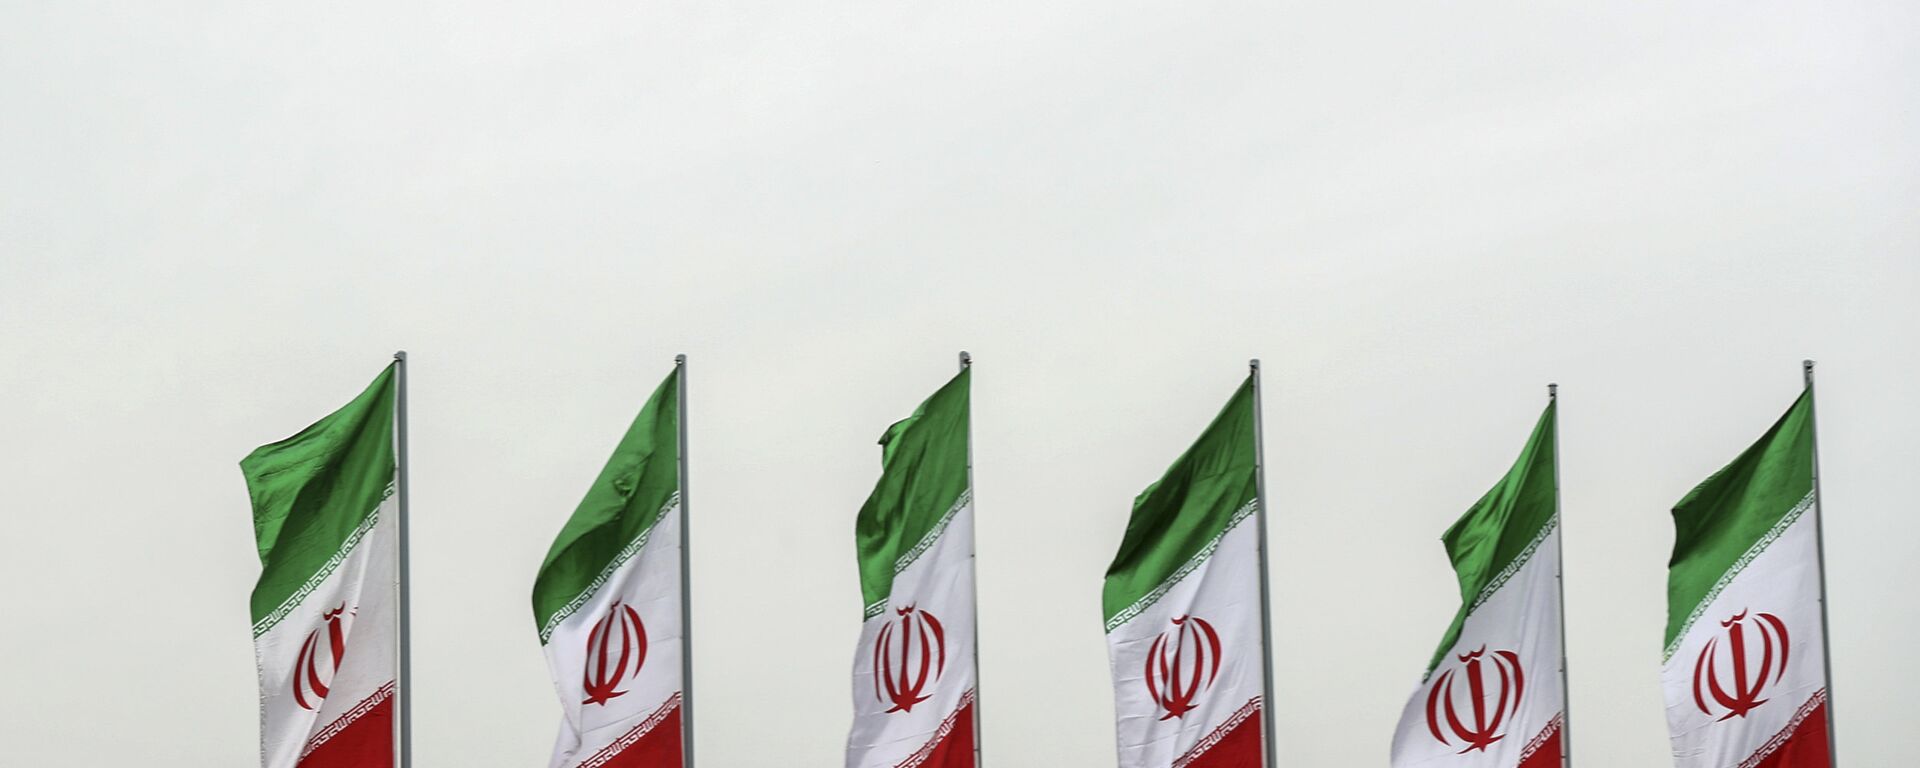 In this photo released by the official website of the office of the Iranian Presidency, a fighter jet flies over Iranian flags during the army parade commemorating National Army Day in front of the shrine of the late revolutionary founder Ayatollah Khomeini, just outside Tehran, Iran, Thursday, April 18, 2019 - Sputnik International, 1920, 10.05.2021